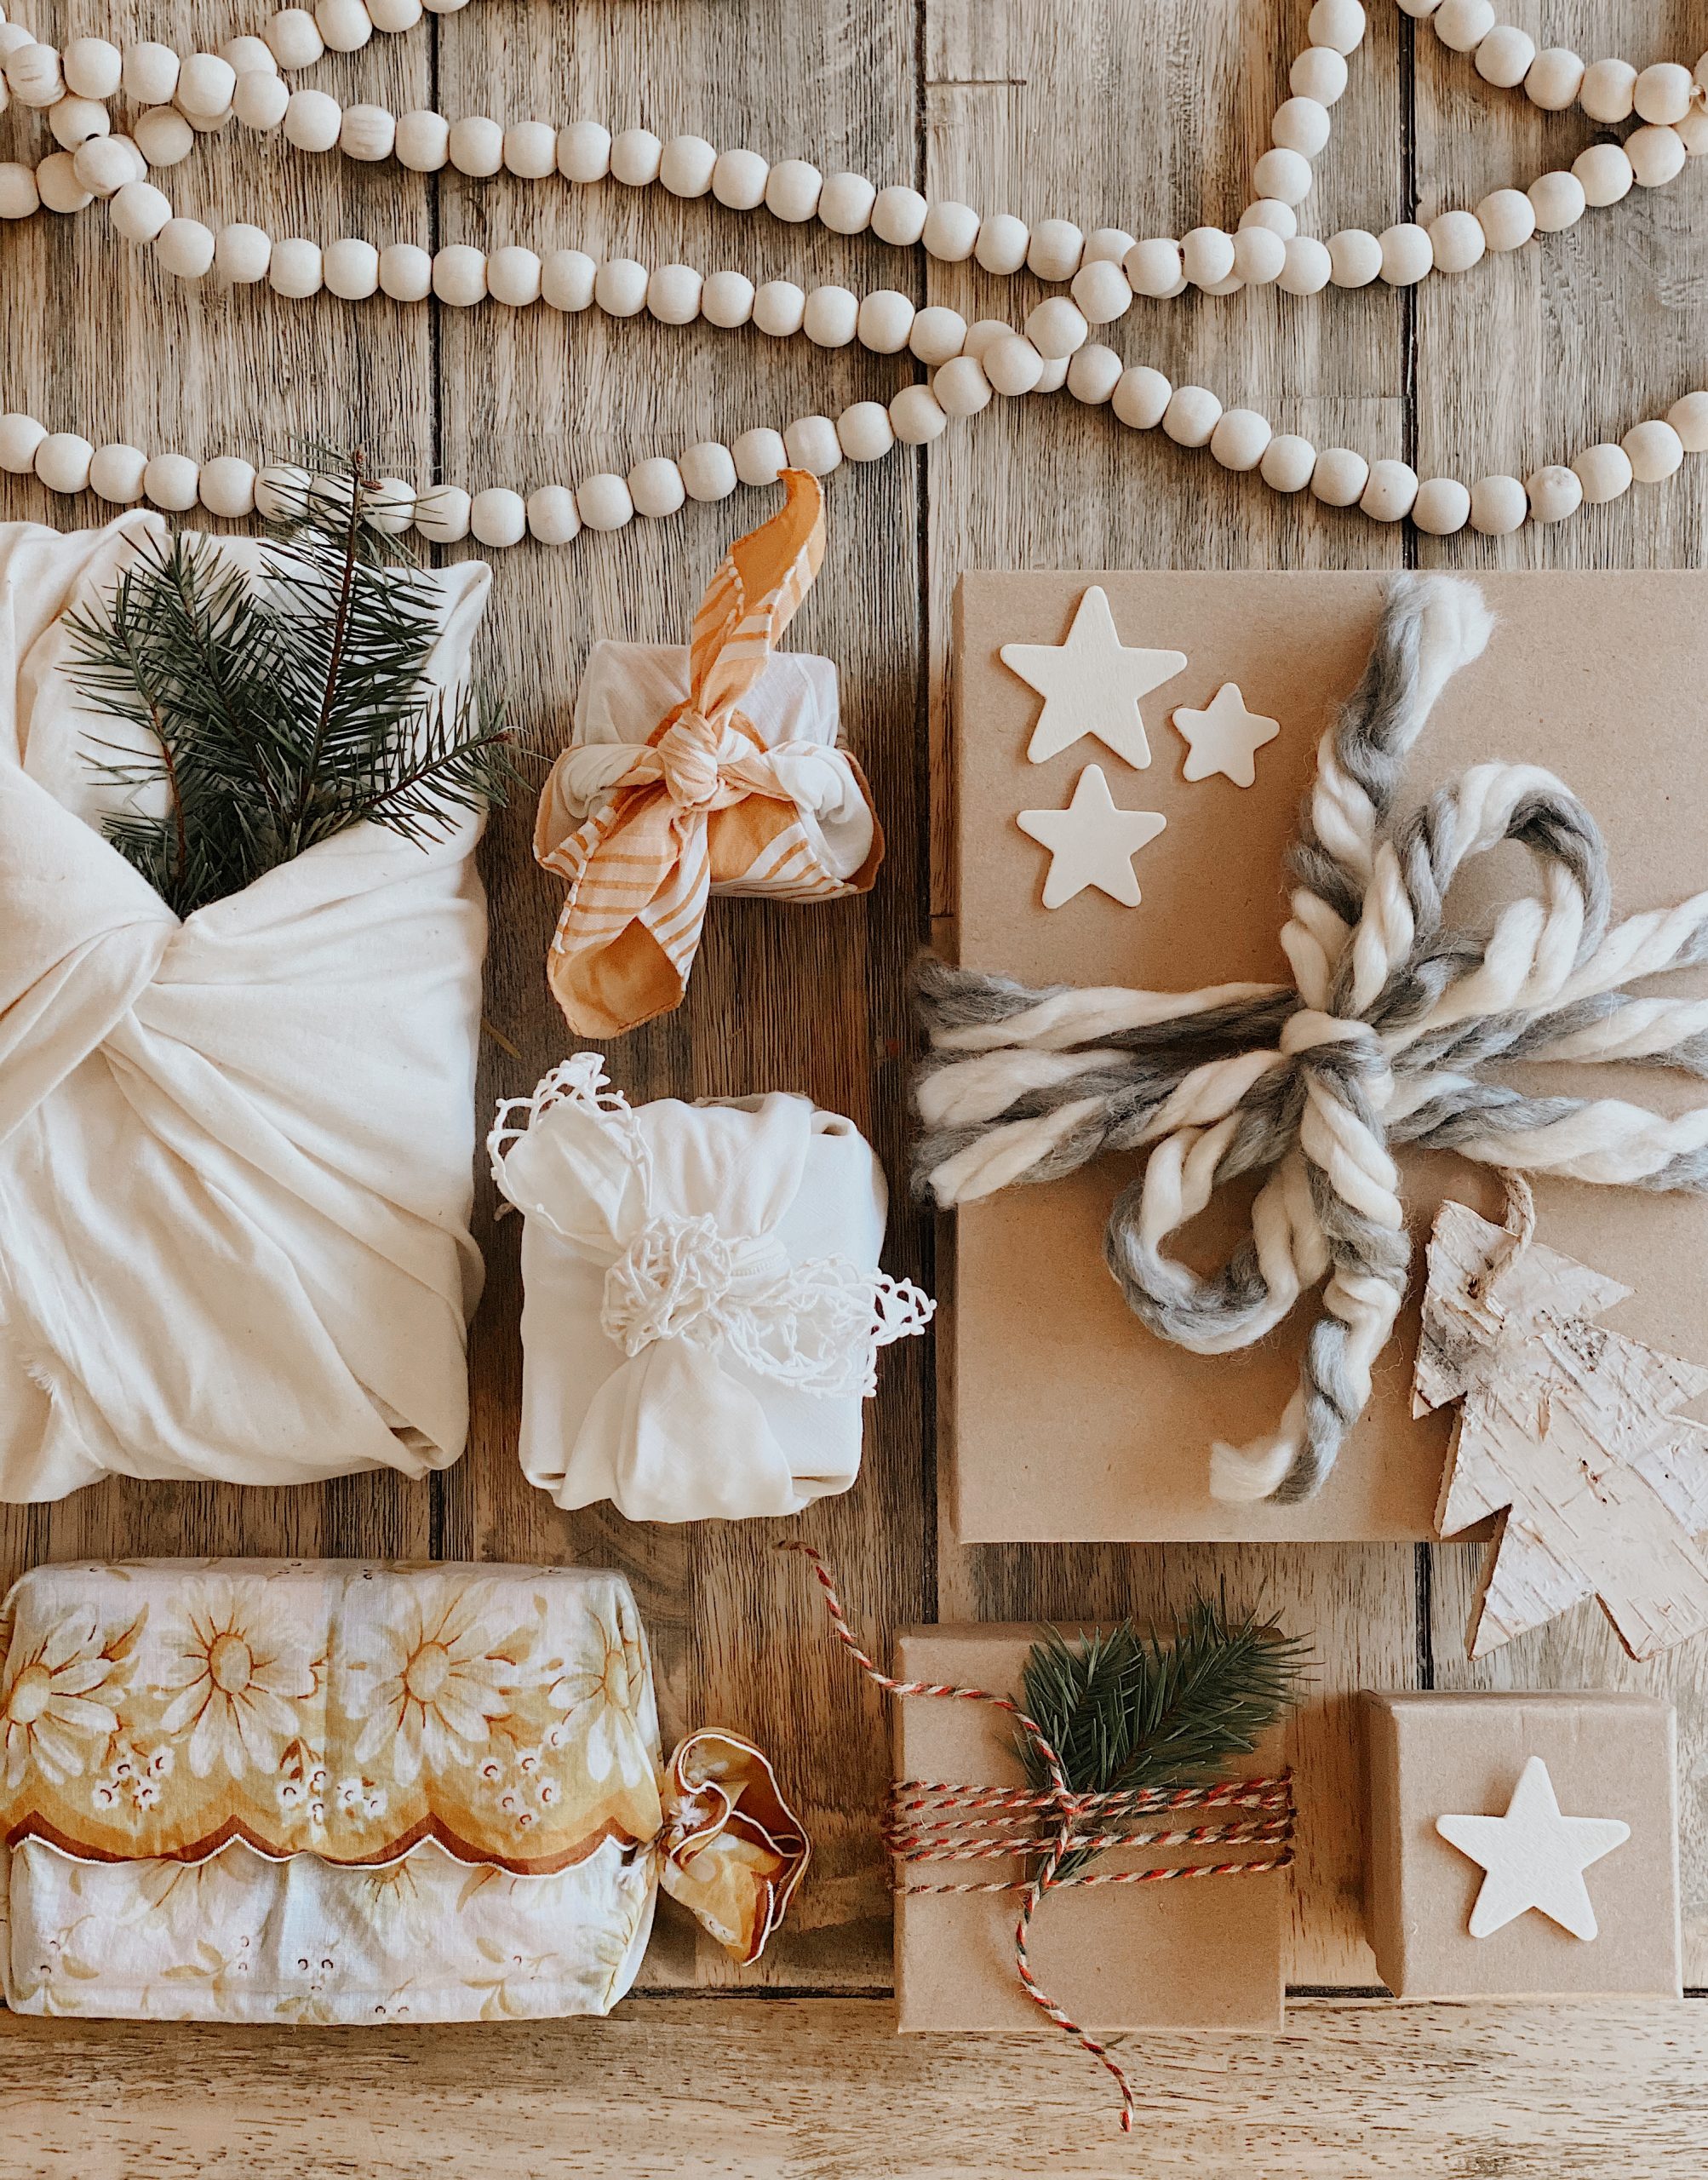 Presentation matters: The effect of wrapping neatness on gift attitudes |  University of Nevada, Reno